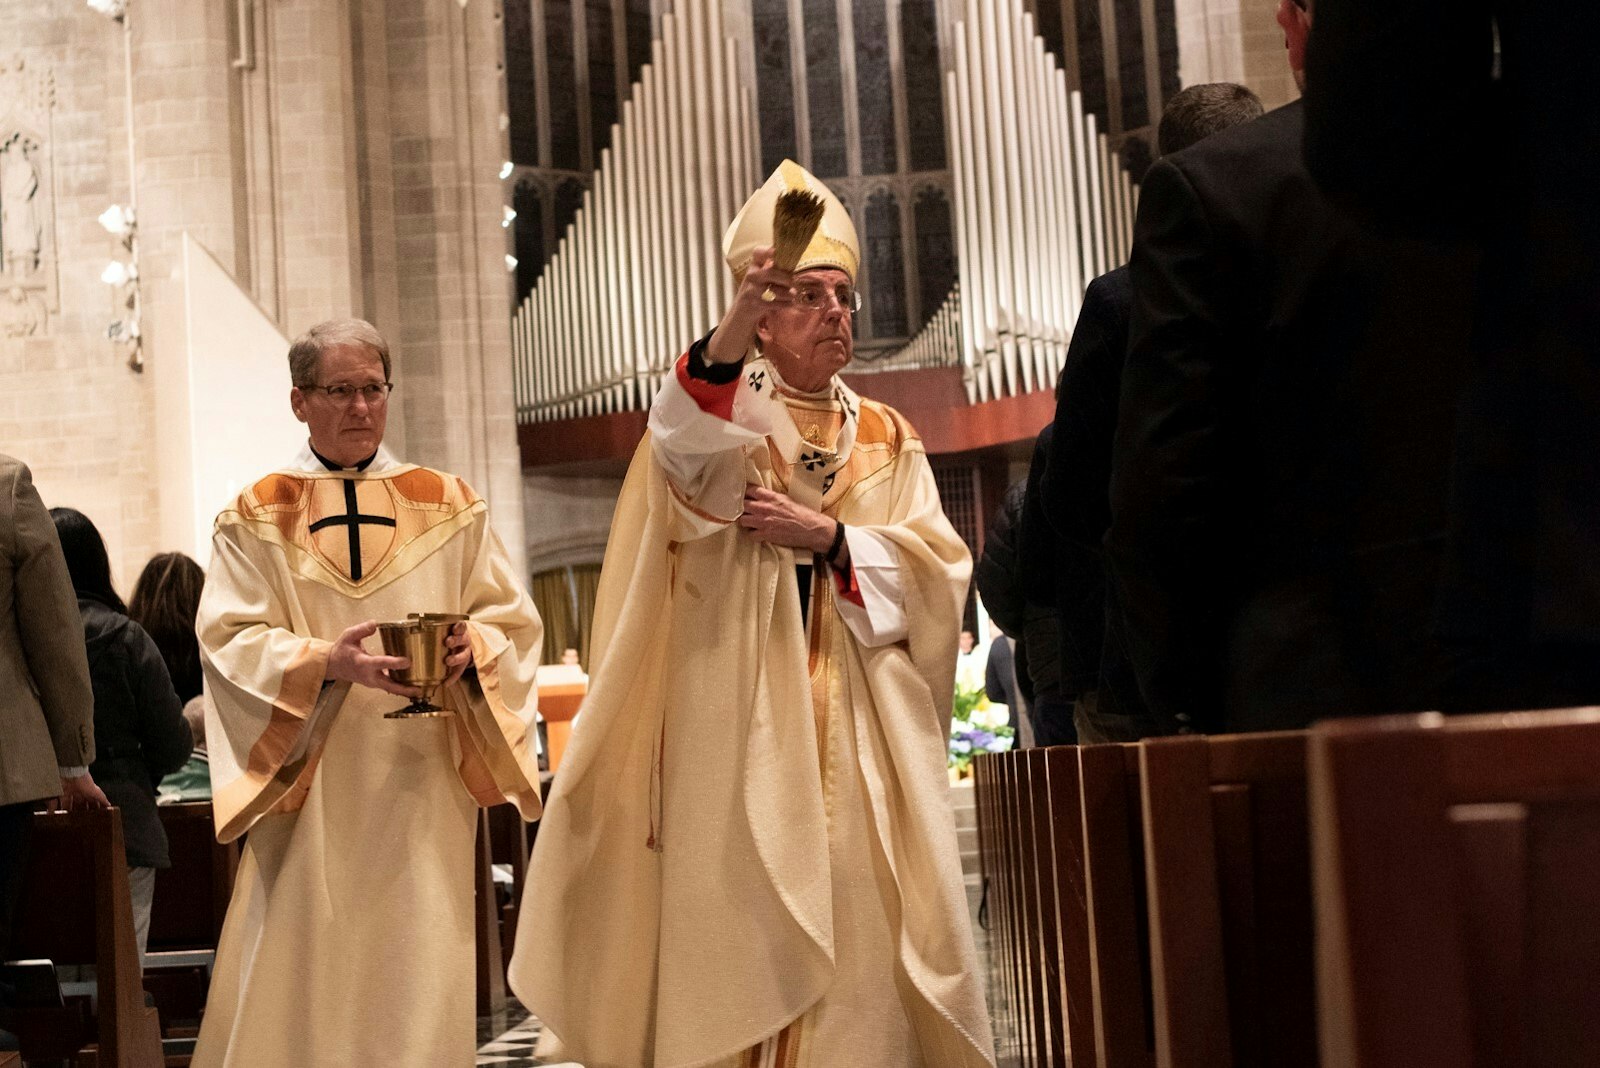 Archbishop Vigneron sprinkles holy water on the congregation after inviting them to renew their baptismal promises as Deacon Michael Van Dyke assists during the Easter vigil at the Cathedral of the Most Blessed Sacrament.